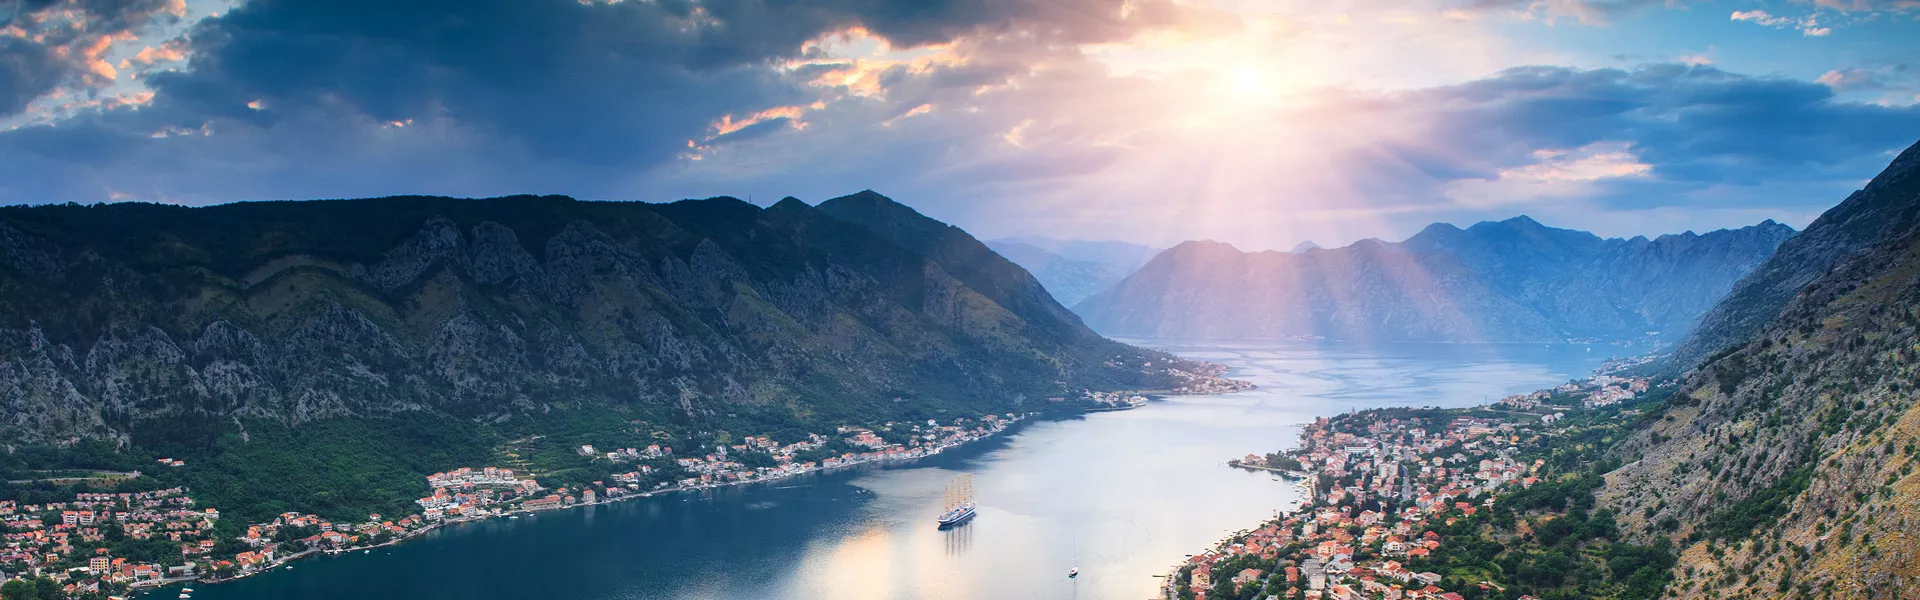 Montenegro Guided Tours and Travel Guide 